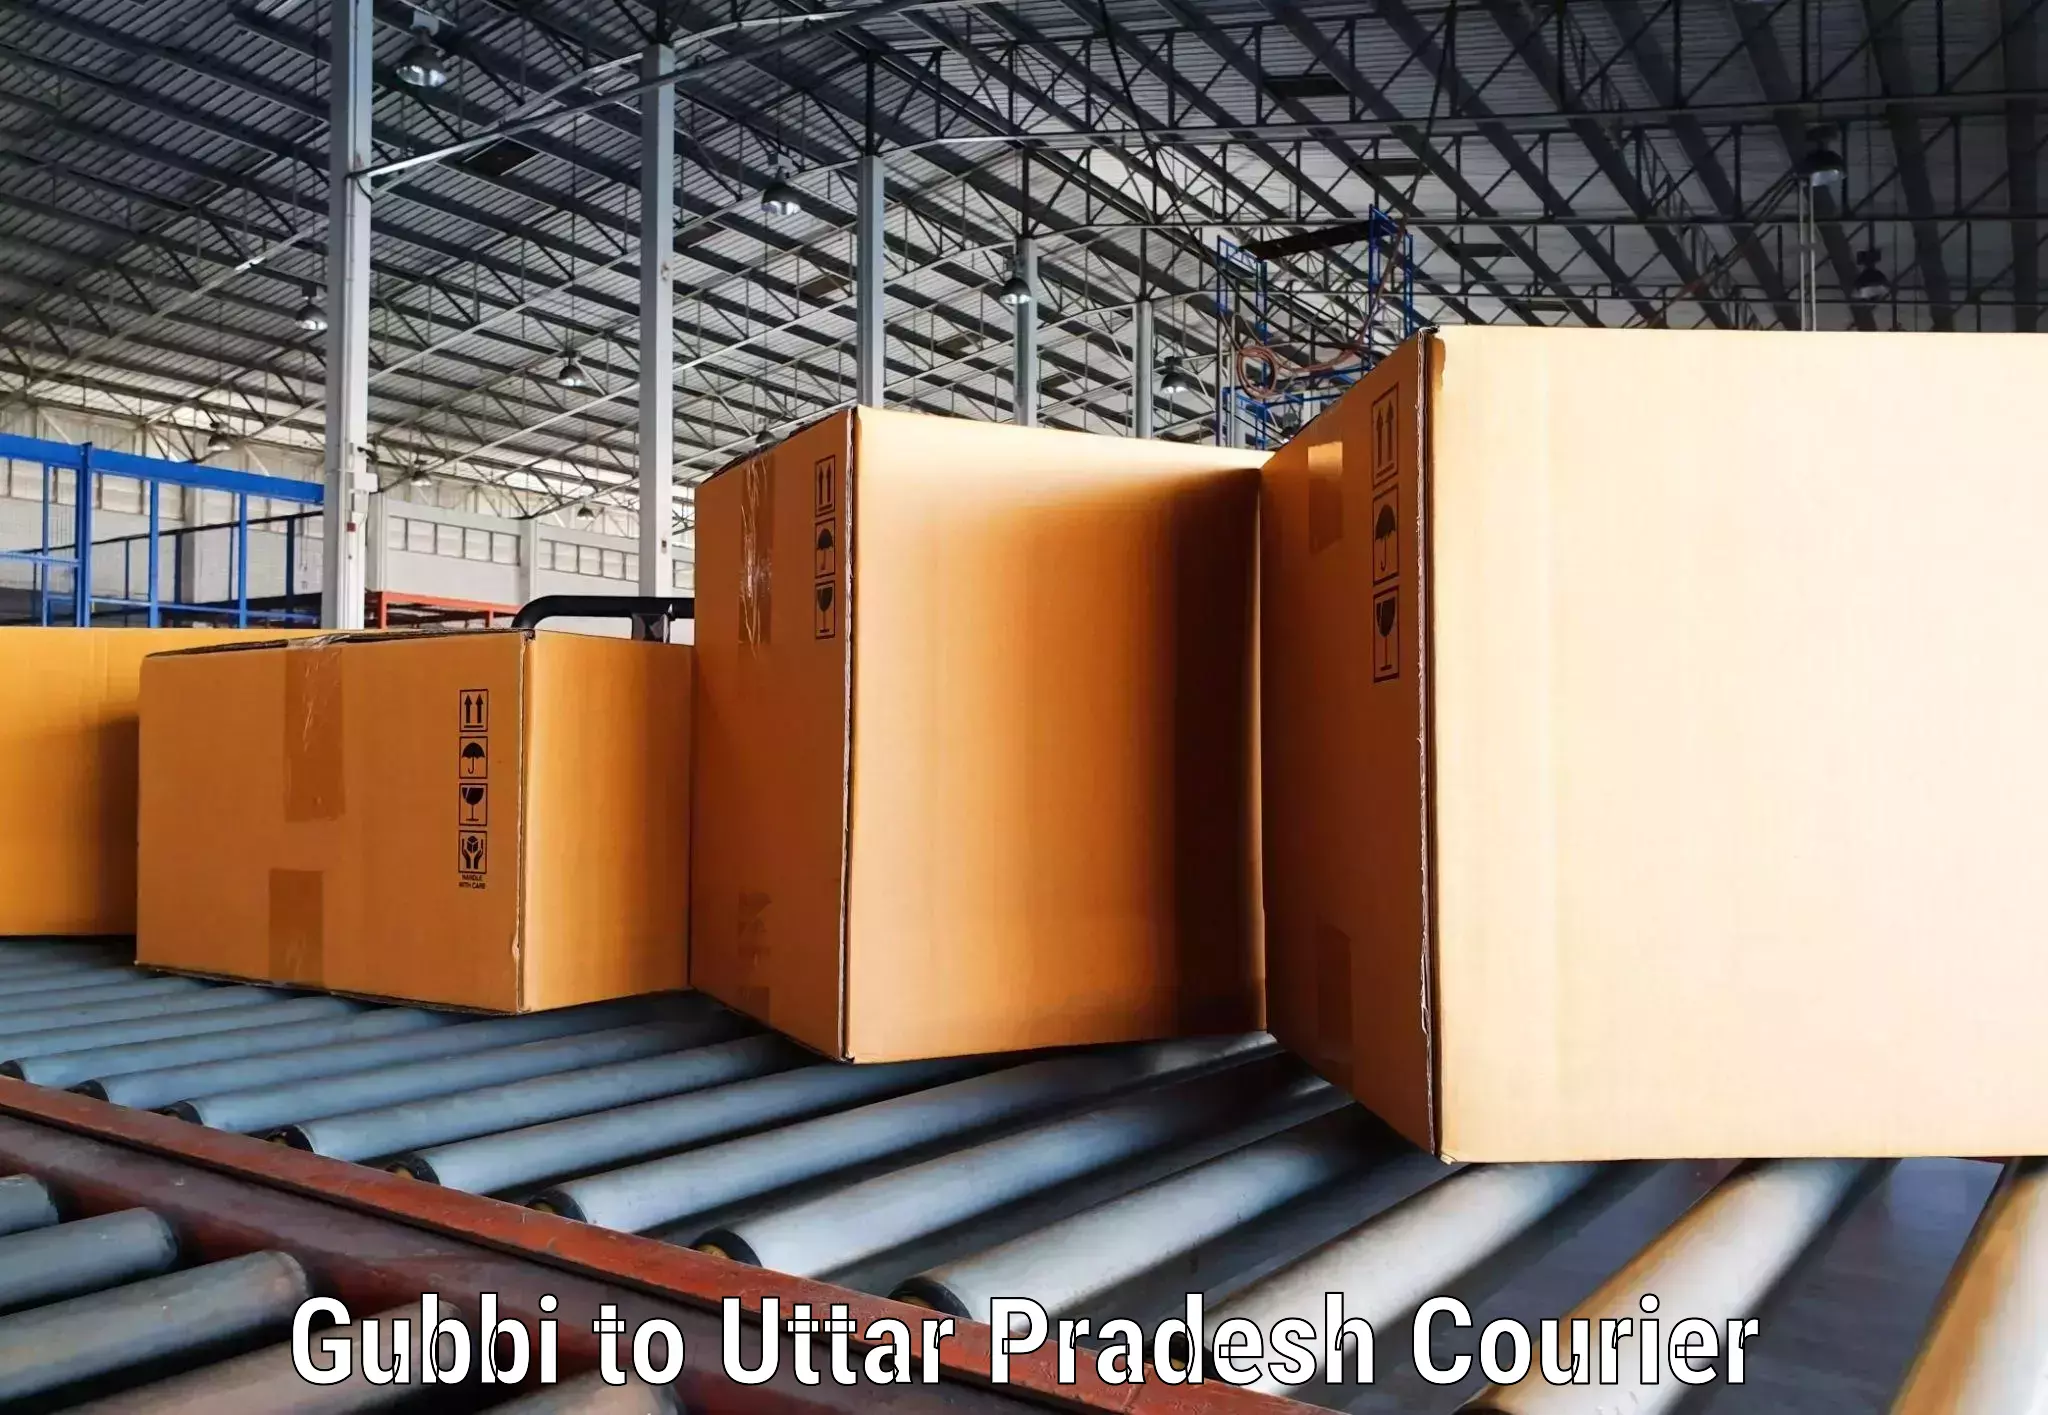 Dynamic courier operations Gubbi to Sirathu